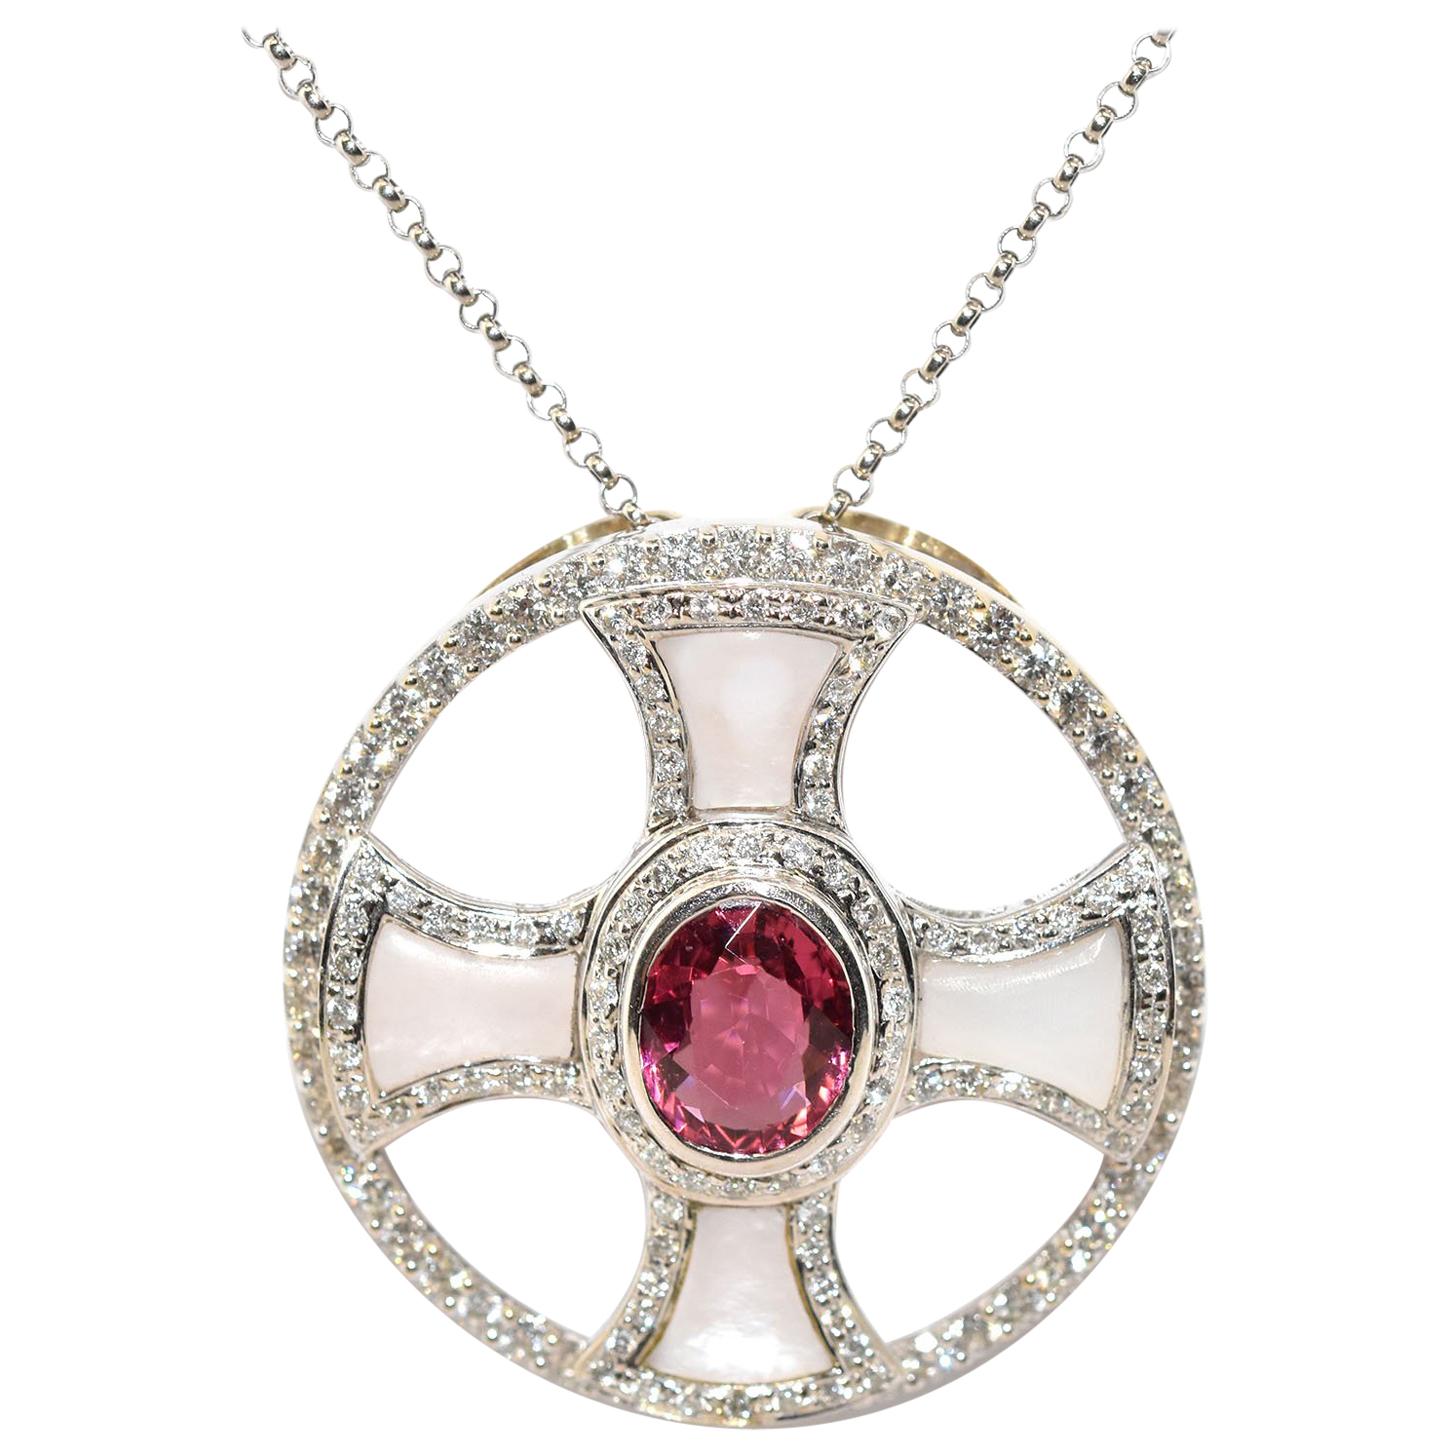 Custom 14 Karat White Gold Diamond, Pink Tourmaline and Mother-of-Pearl Necklace For Sale